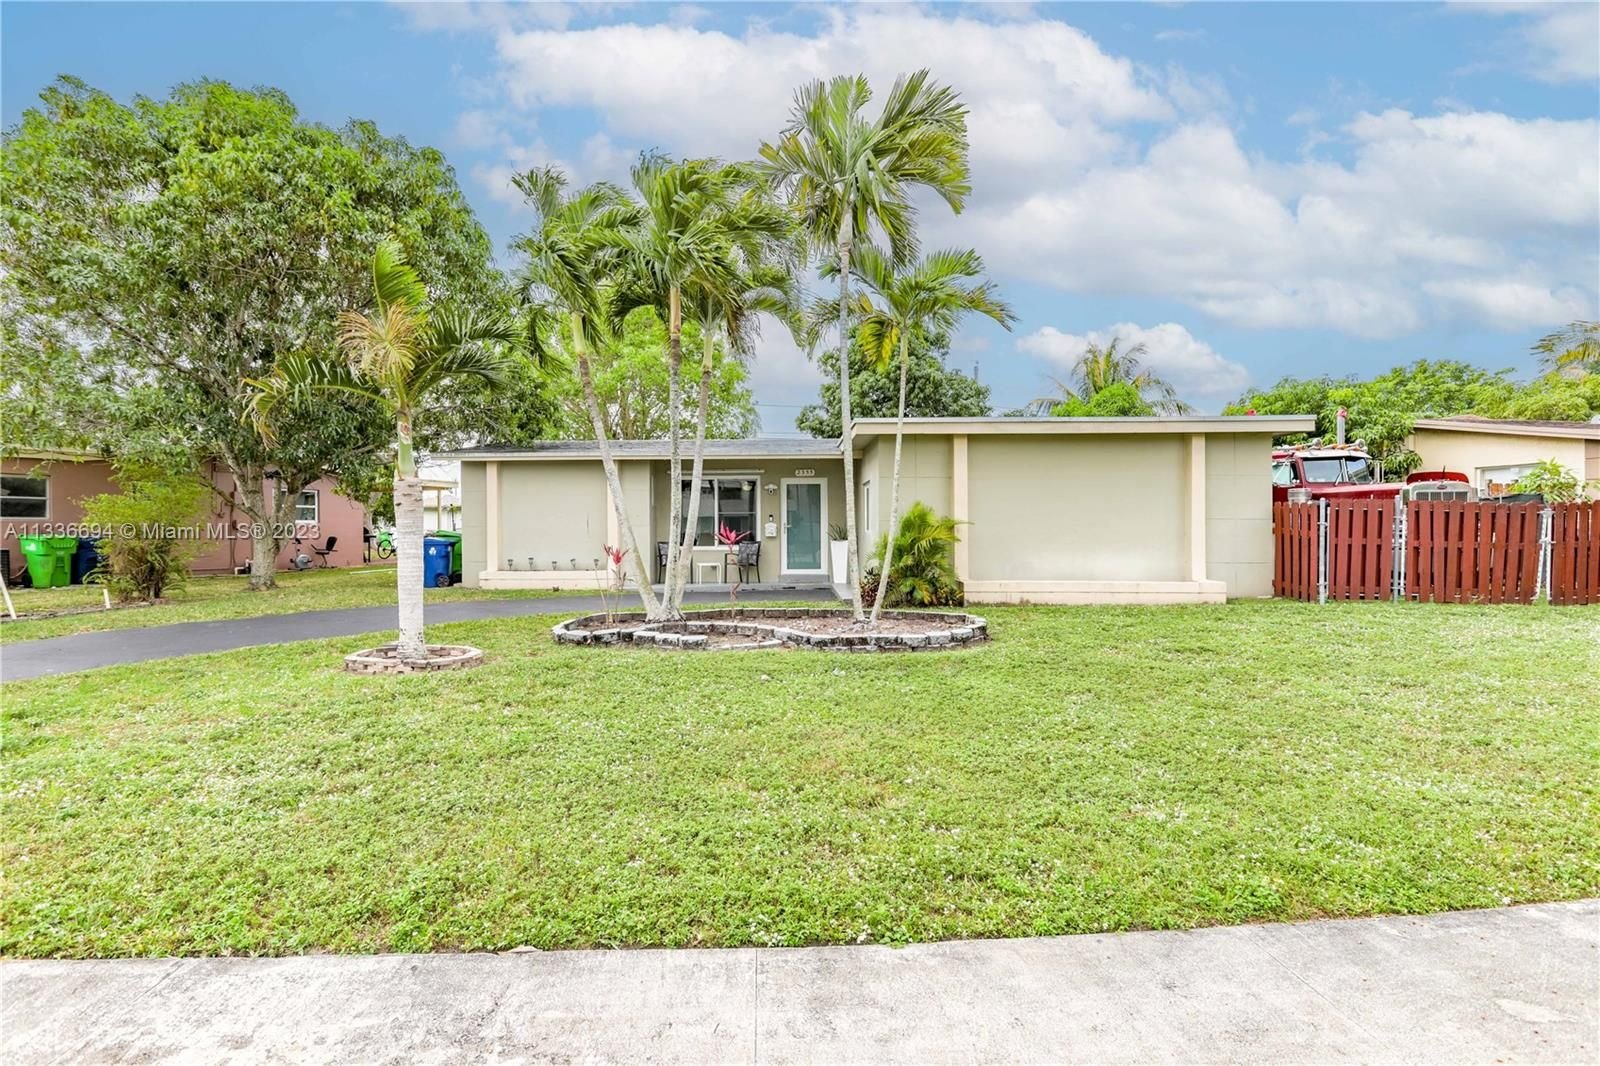 Real estate property located at 2355 81st Ave, Broward County, Sunrise, FL